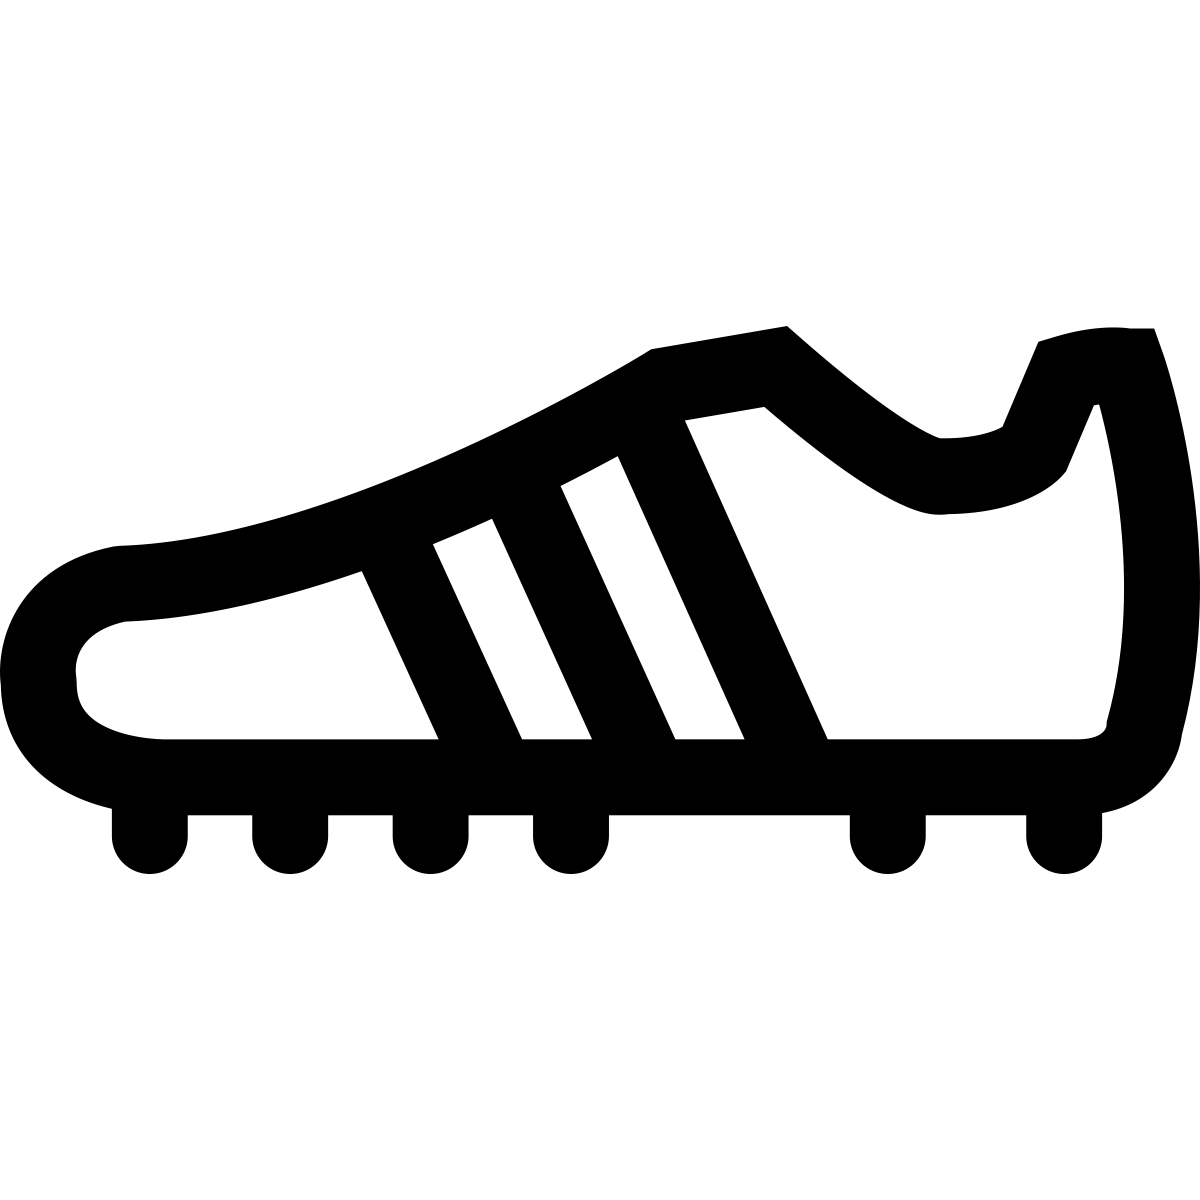 Cleats Logo - Want A Cleat Reviewed? Best Soccer Cleats